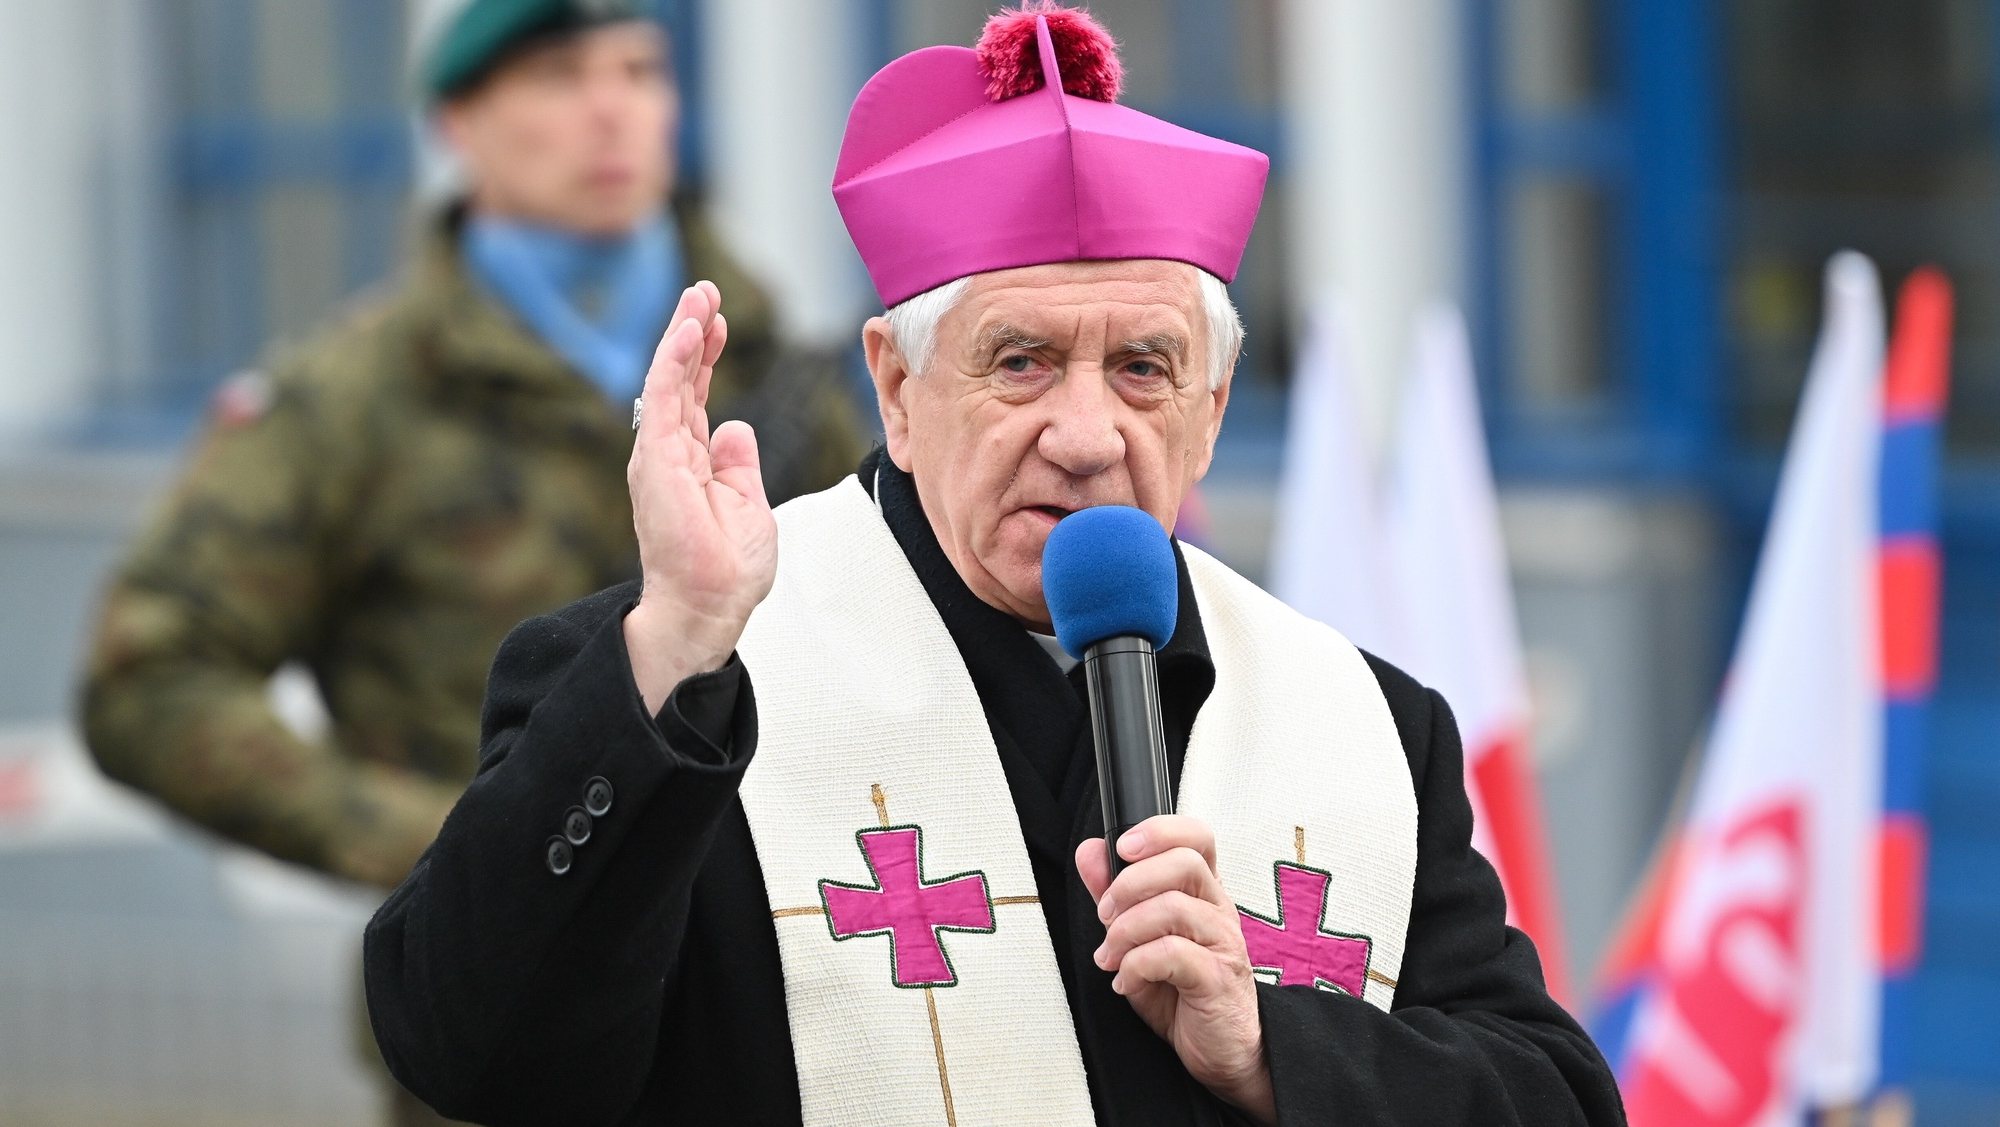 epa11034294 Metropolitan of Szczecin-KamieÃ±, Archbishop Andrzej Dziega speaks during the ceremony in front of the gate of the Szczecin Shipyard commemorating the victims of Szczecin December &#039;70, in Szczecin, northwest Poland, 17 December 2023. In December 1970, a wave of strikes and demonstrations against price increases introduced by the communist authorities occured. To quell the protests, the authorities allowed the police and army to use weapons. According to official figures, 16 people were killed and more than 100 wounded in Szczecin.  EPA/Marcin Bielecki POLAND OUT